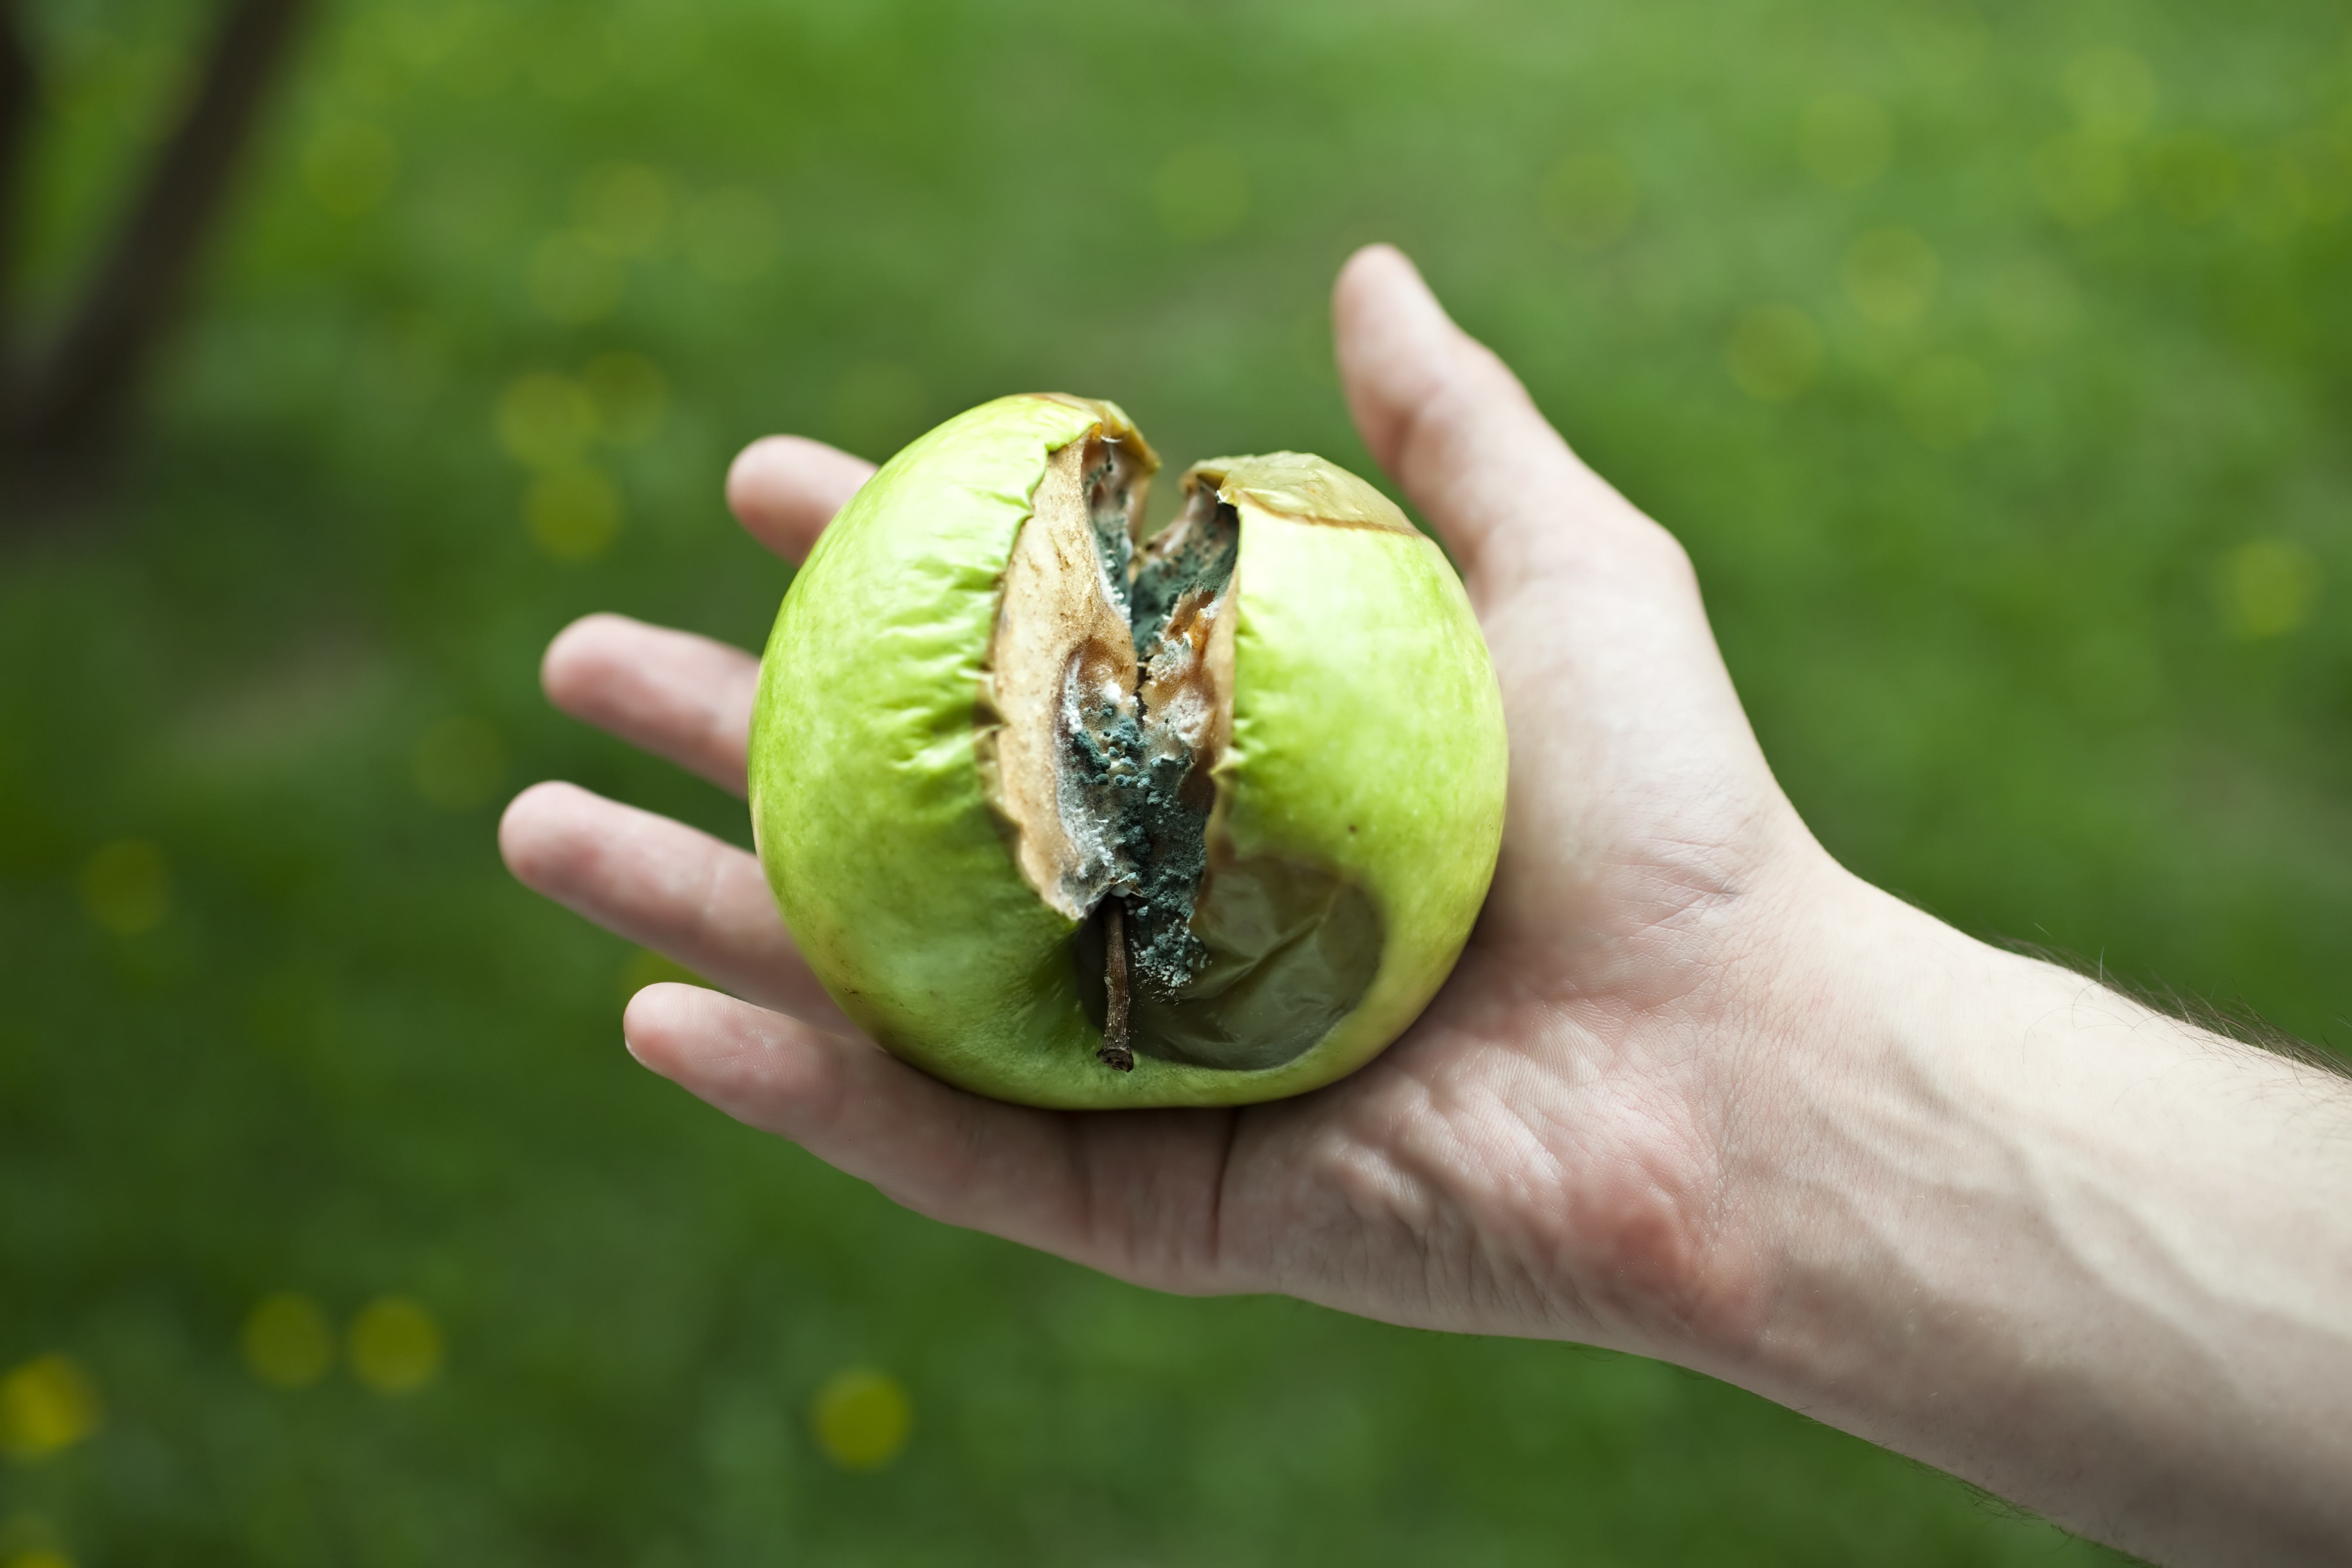 Rotten apple green with mold in a human hand on a background of grass